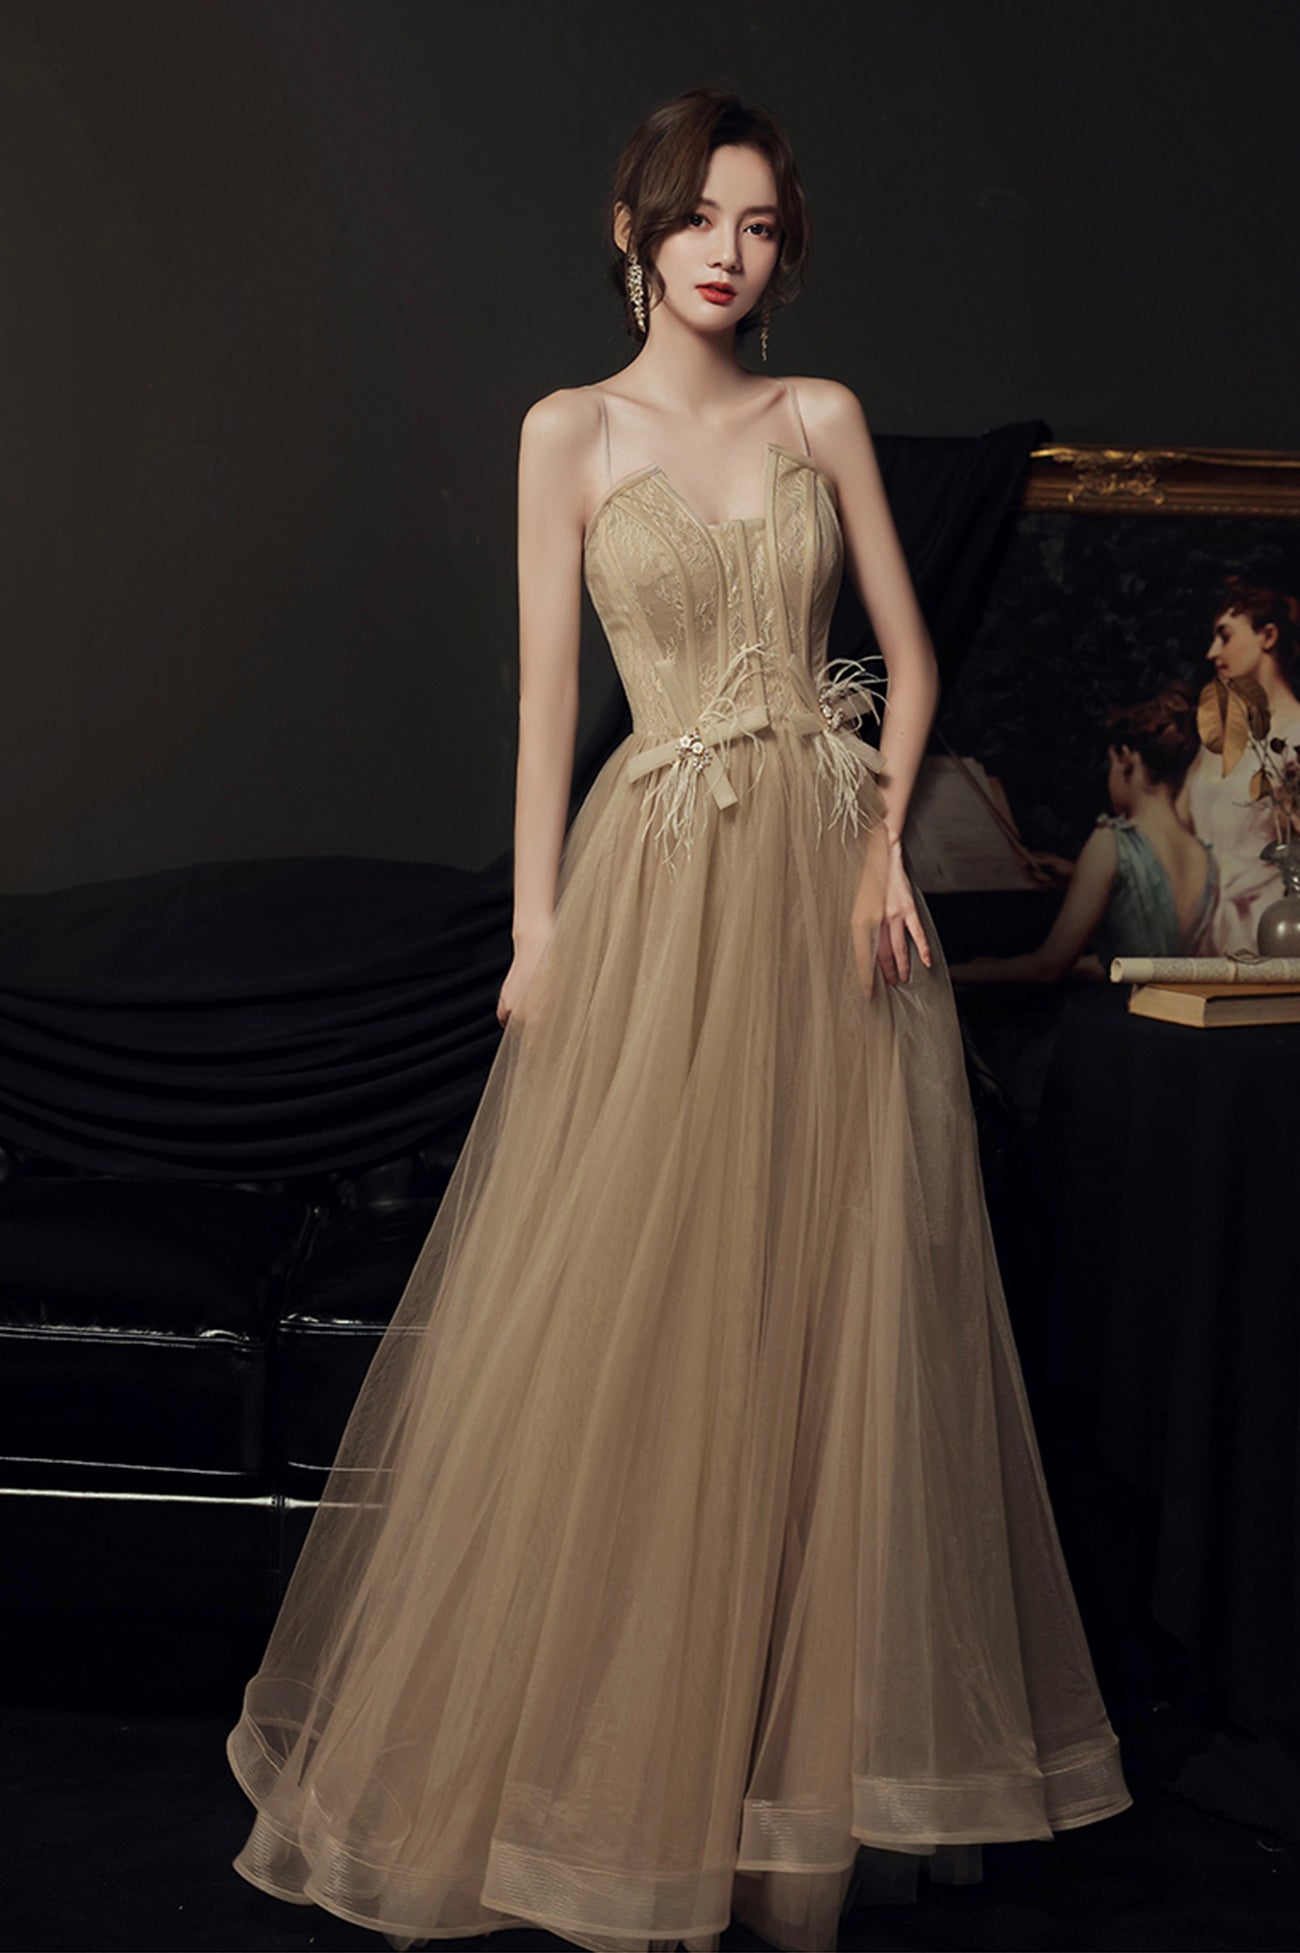 Stylish Tulle Long A-Line Prom Dress, Champagne Strapless Evening Party Dress